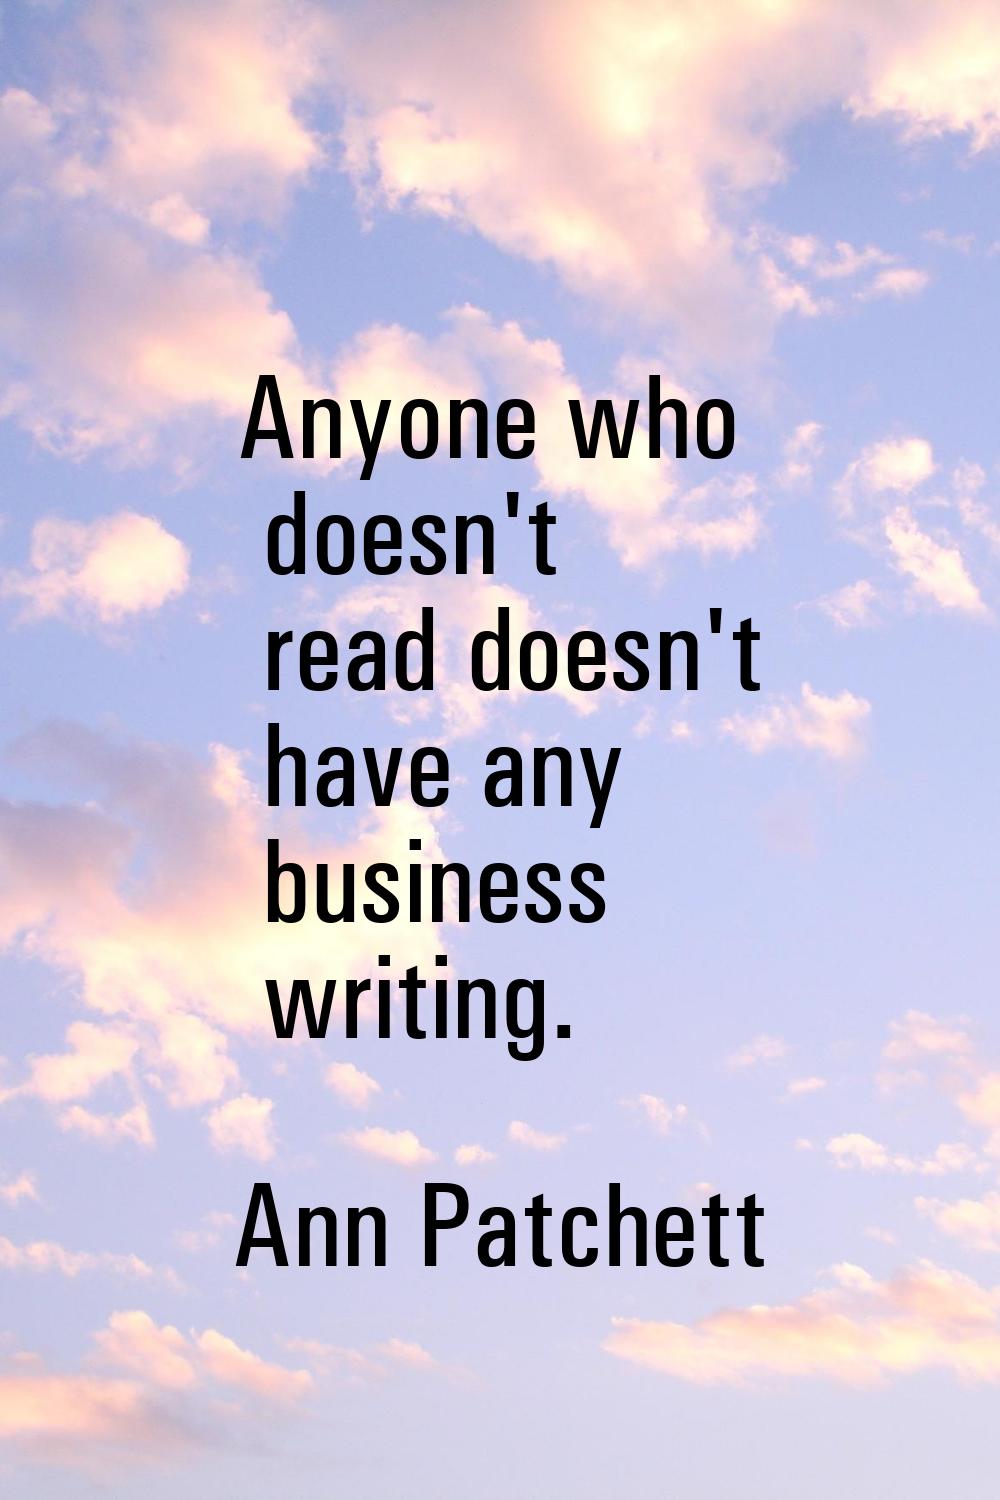 Anyone who doesn't read doesn't have any business writing.